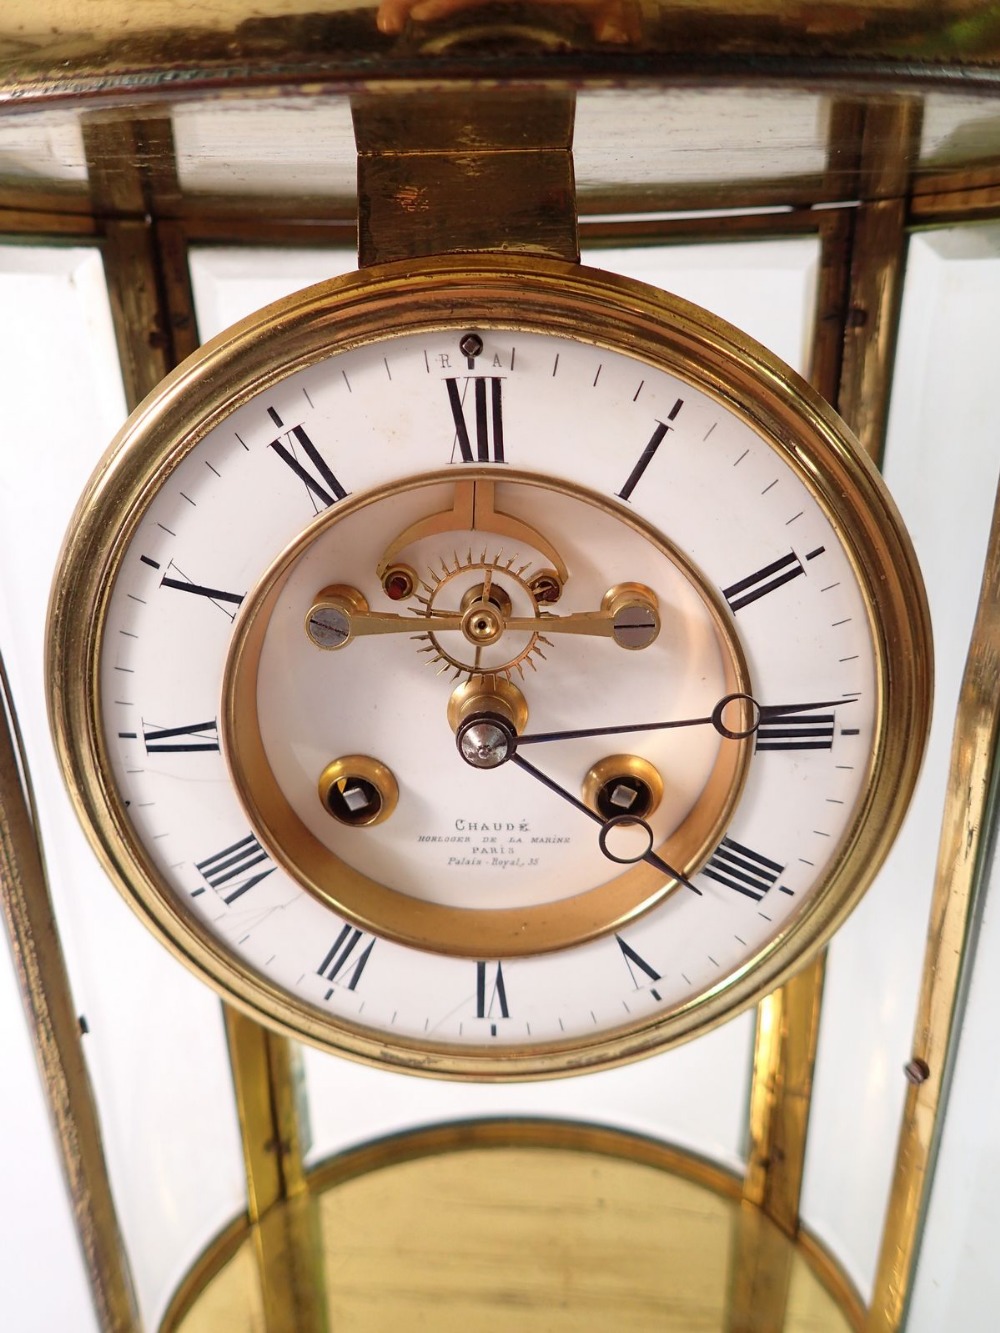 A fine 19th century French oval four glass mantel clock with mercury compensated pendulum by Chaude, - Image 2 of 5